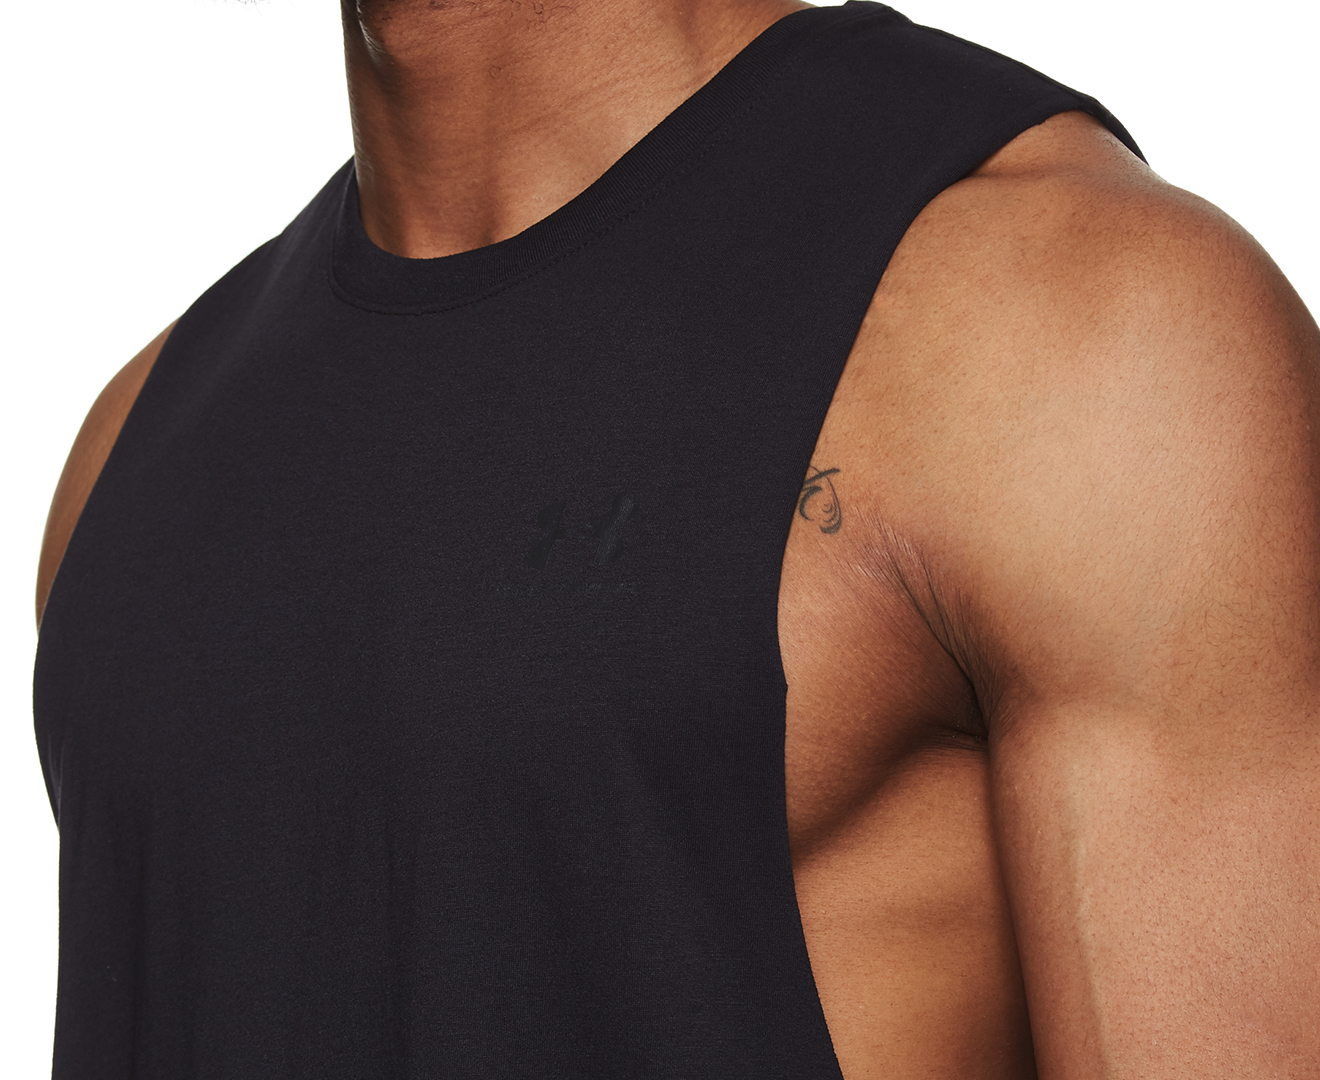 30 Minute Cut Off Sleeve Workout Shirt for push your ABS